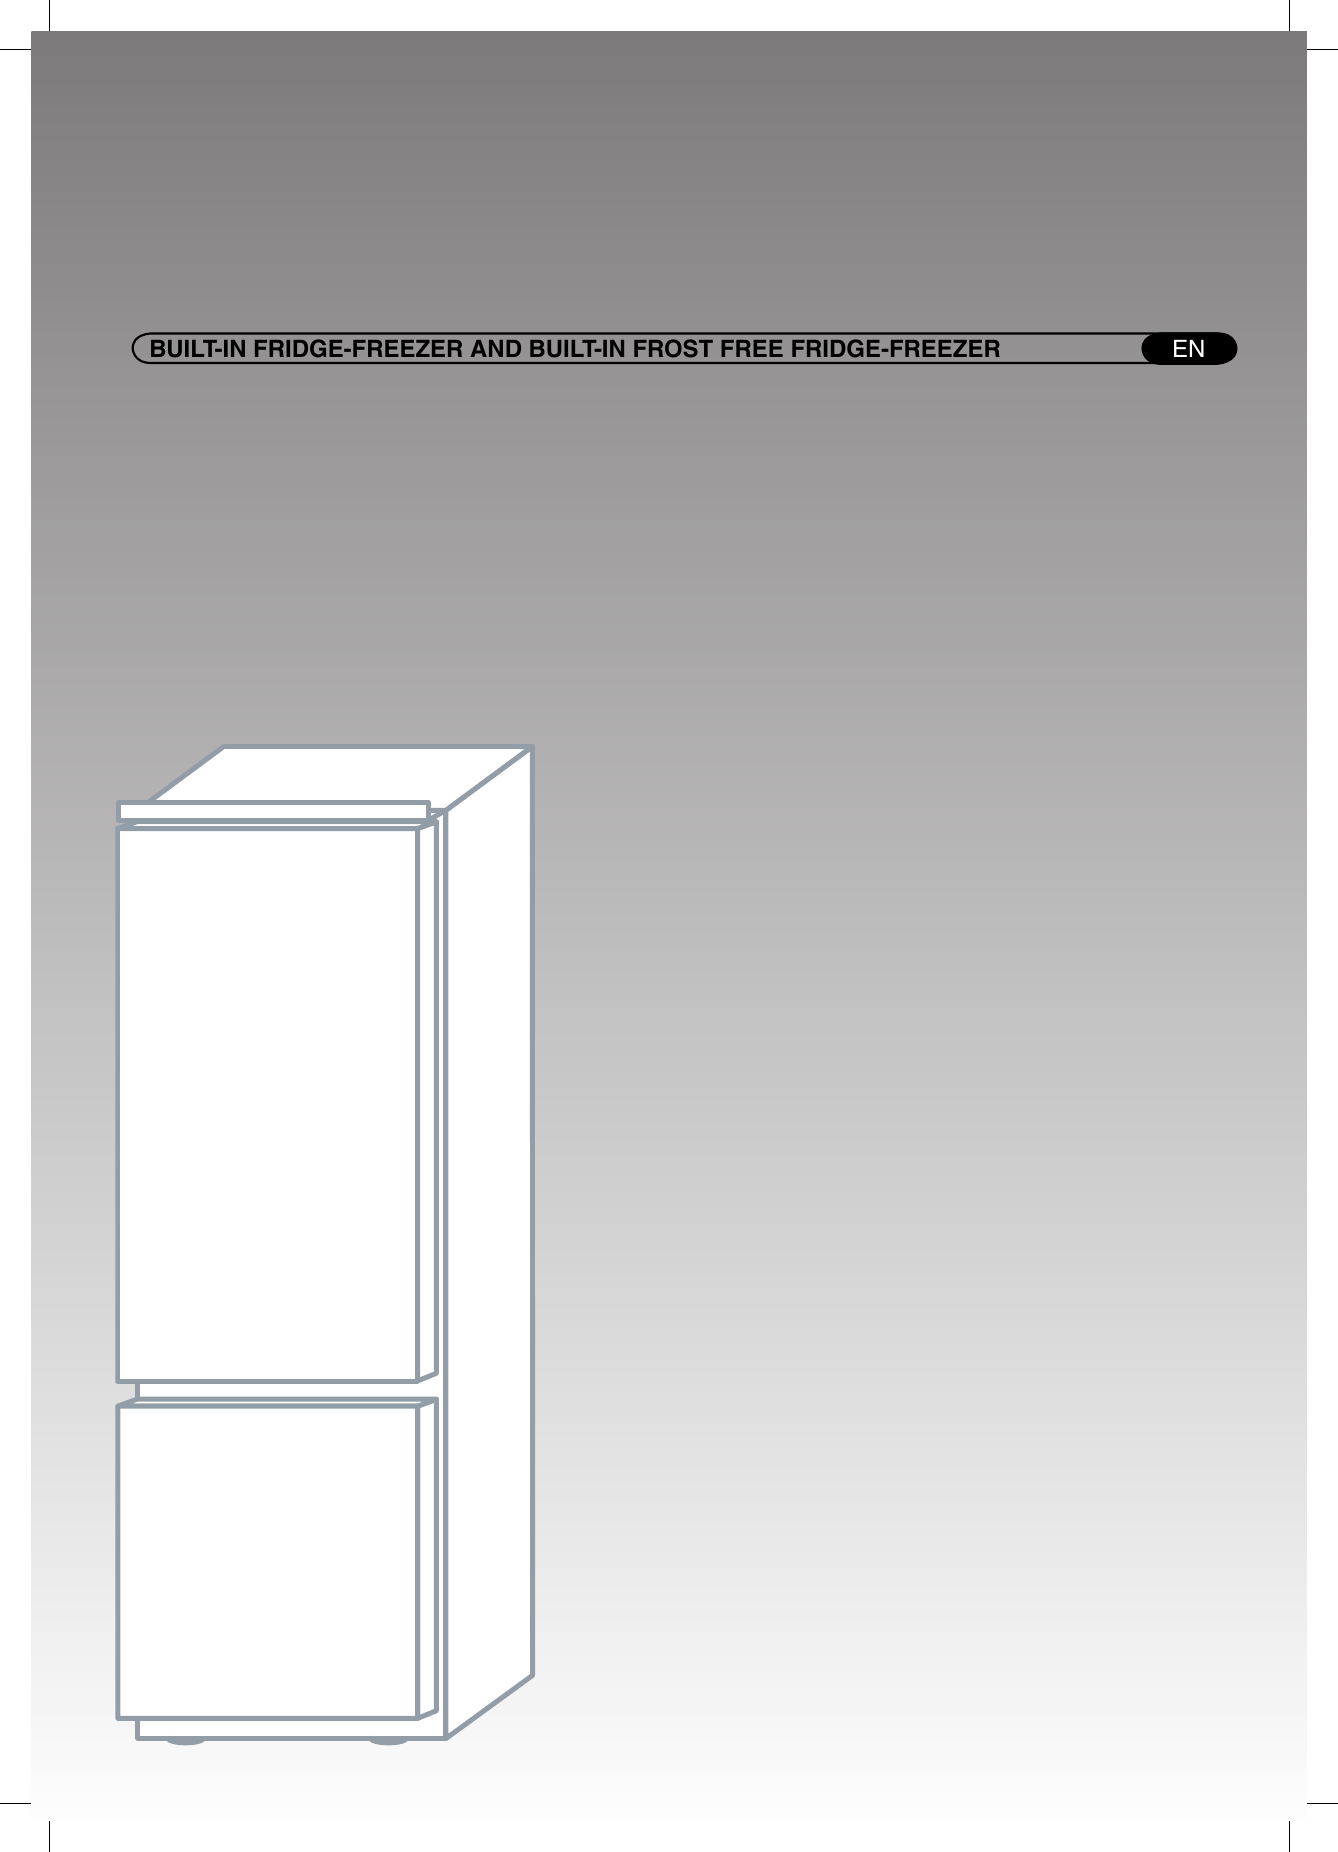 Page 2 of 5 - Hoover Frost Free Fully Integrated Fridge Freezer HFFB 3050AK Instruction Manual - Product Code 34900186 HFFB3050AK